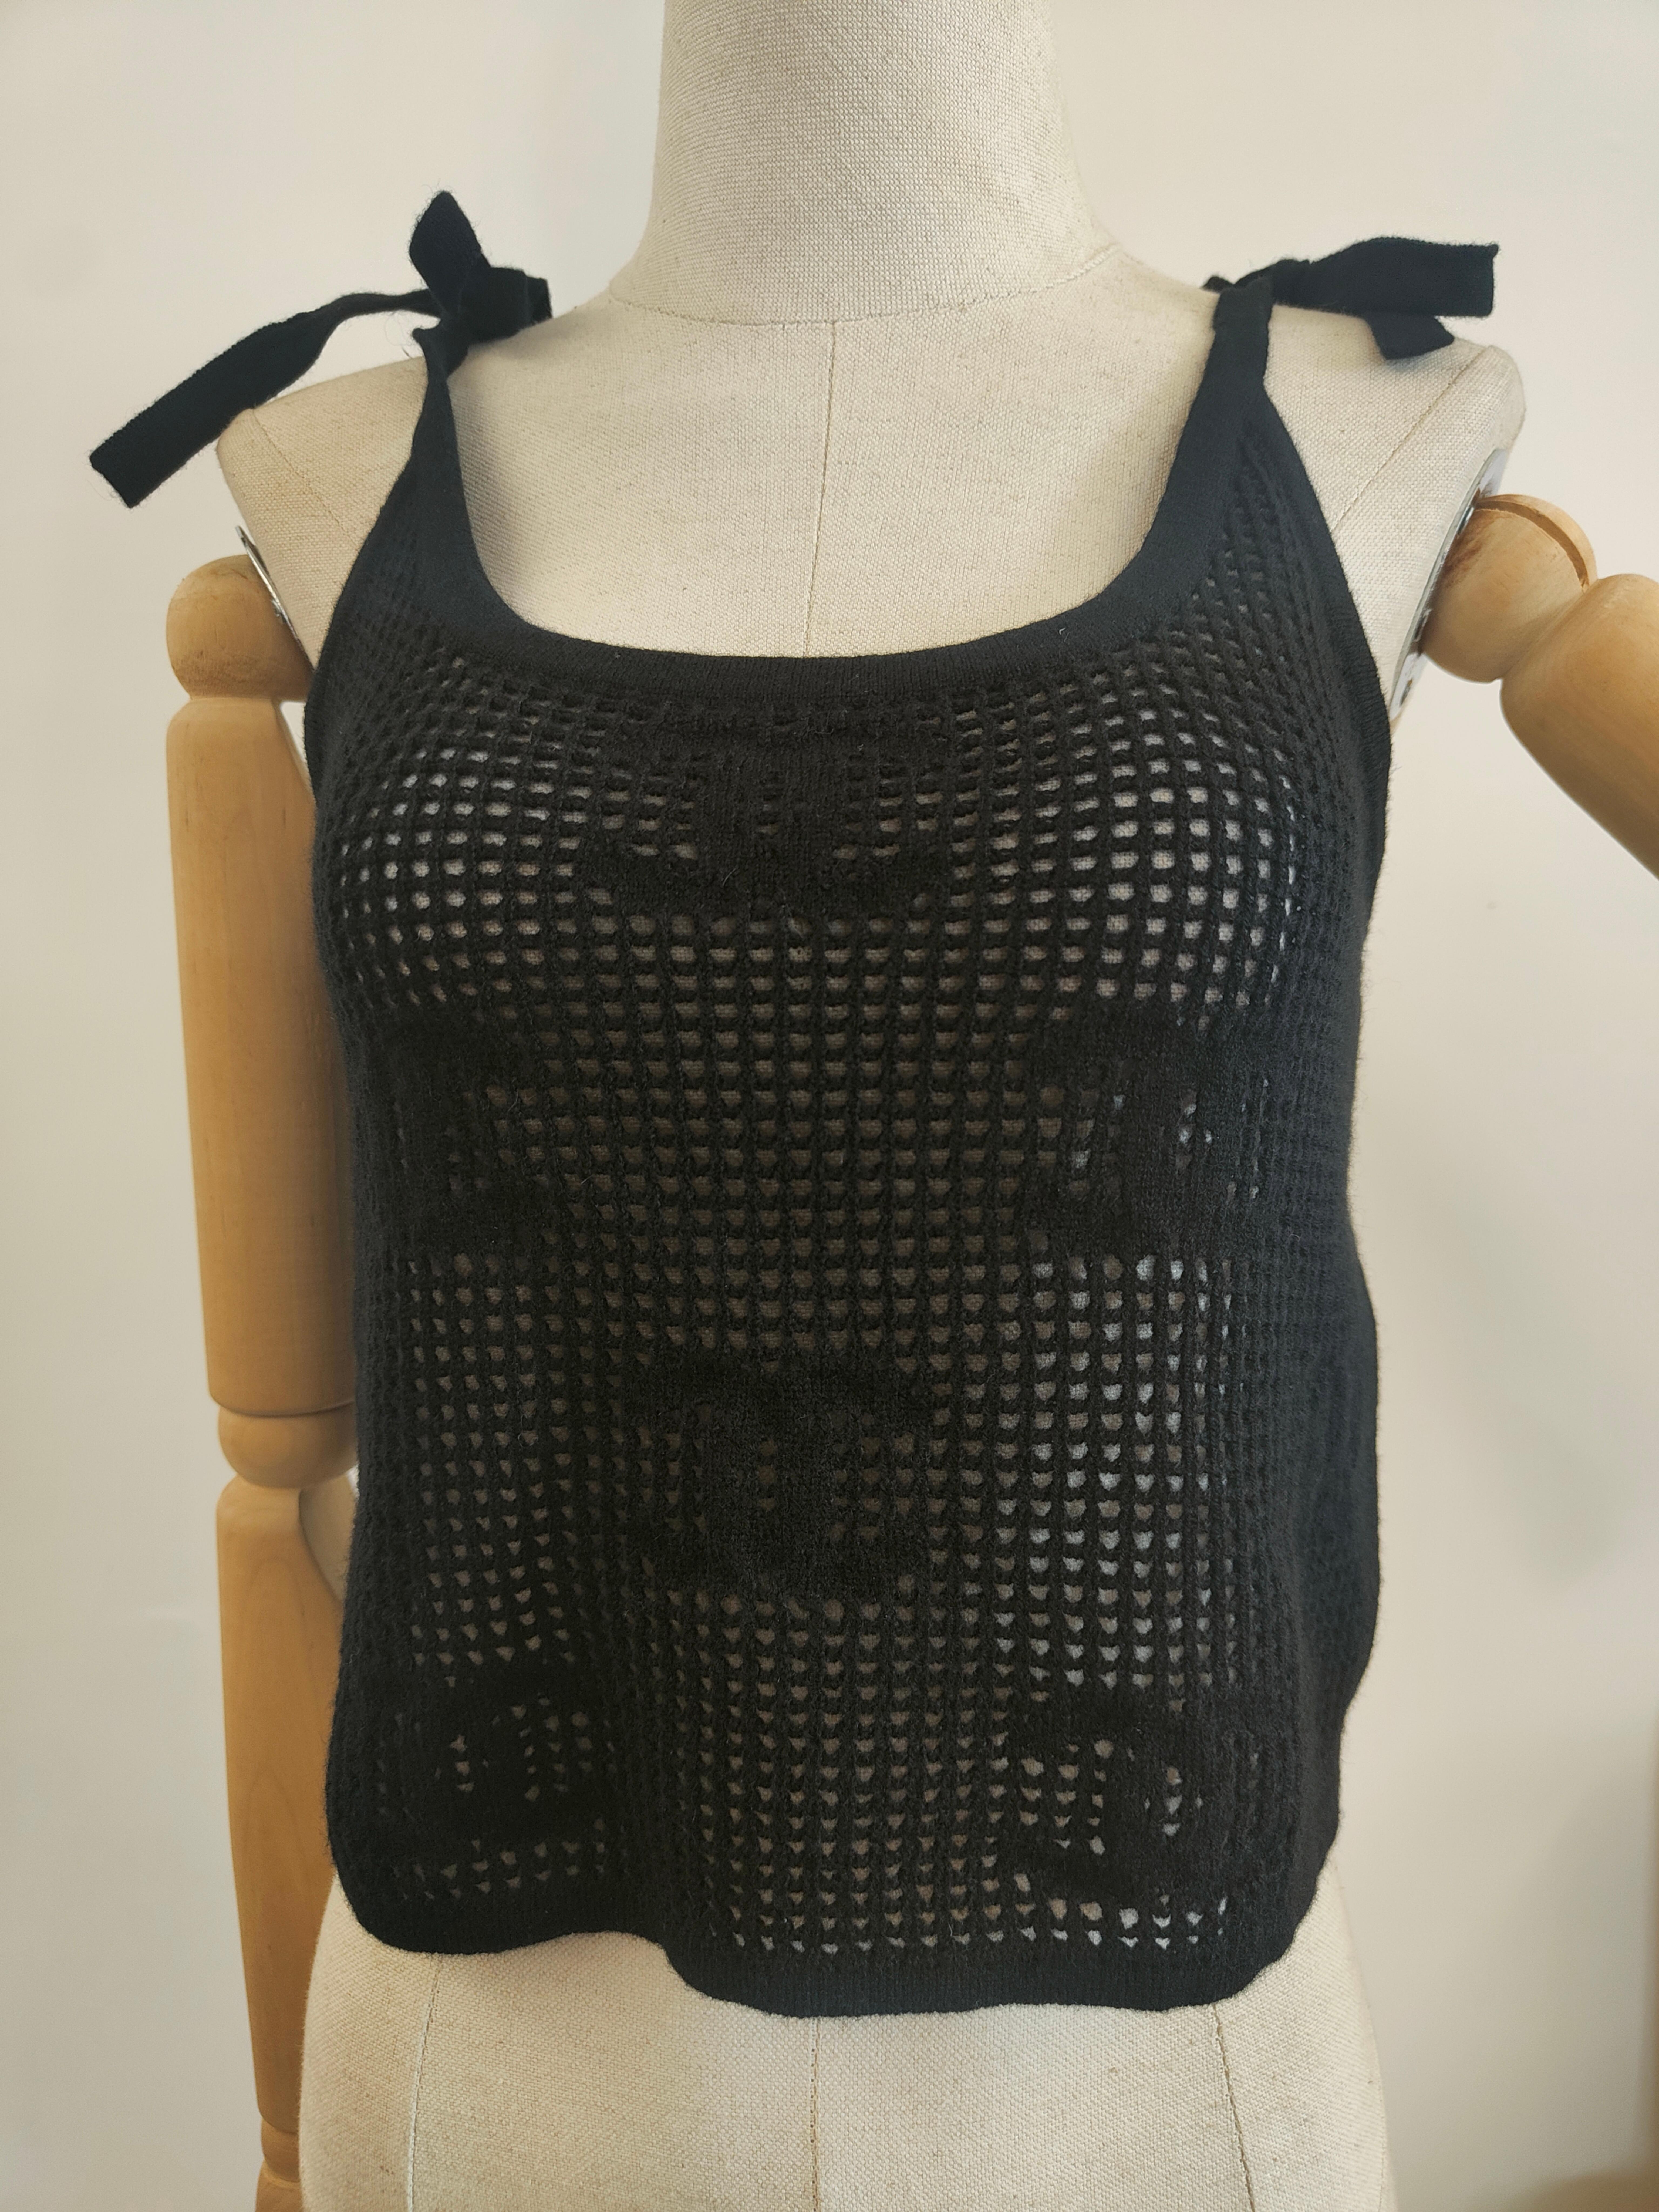 Chanel black CC See through top
Size 42